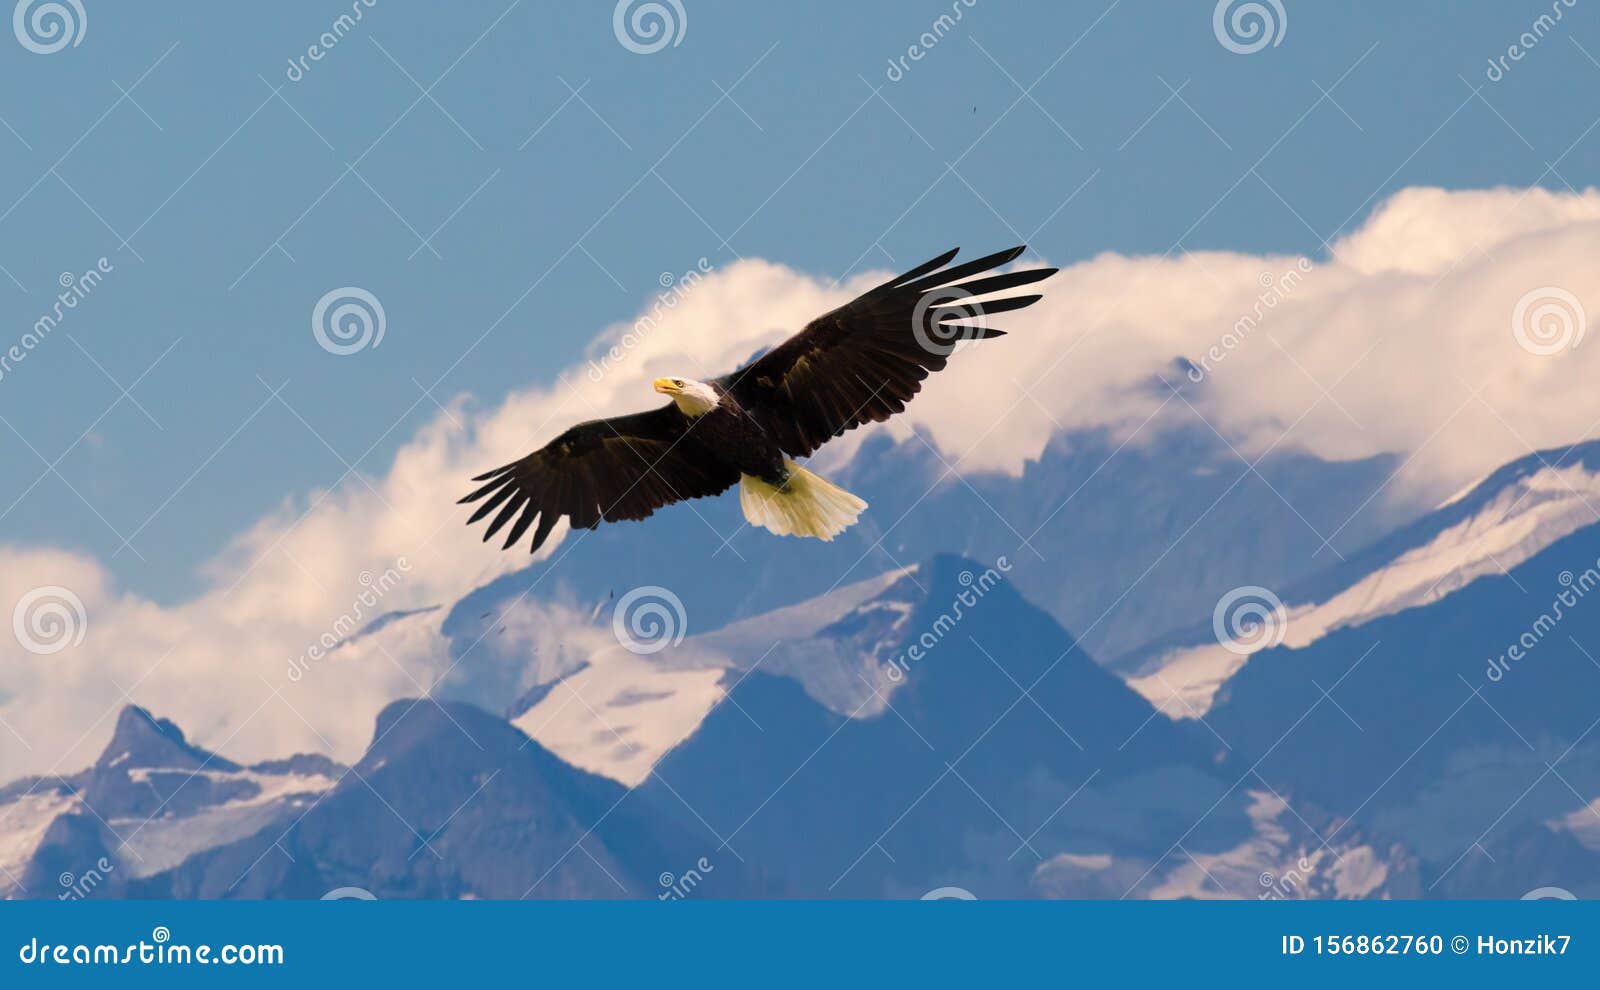 bald eagle flying and gliding slowly and majestic